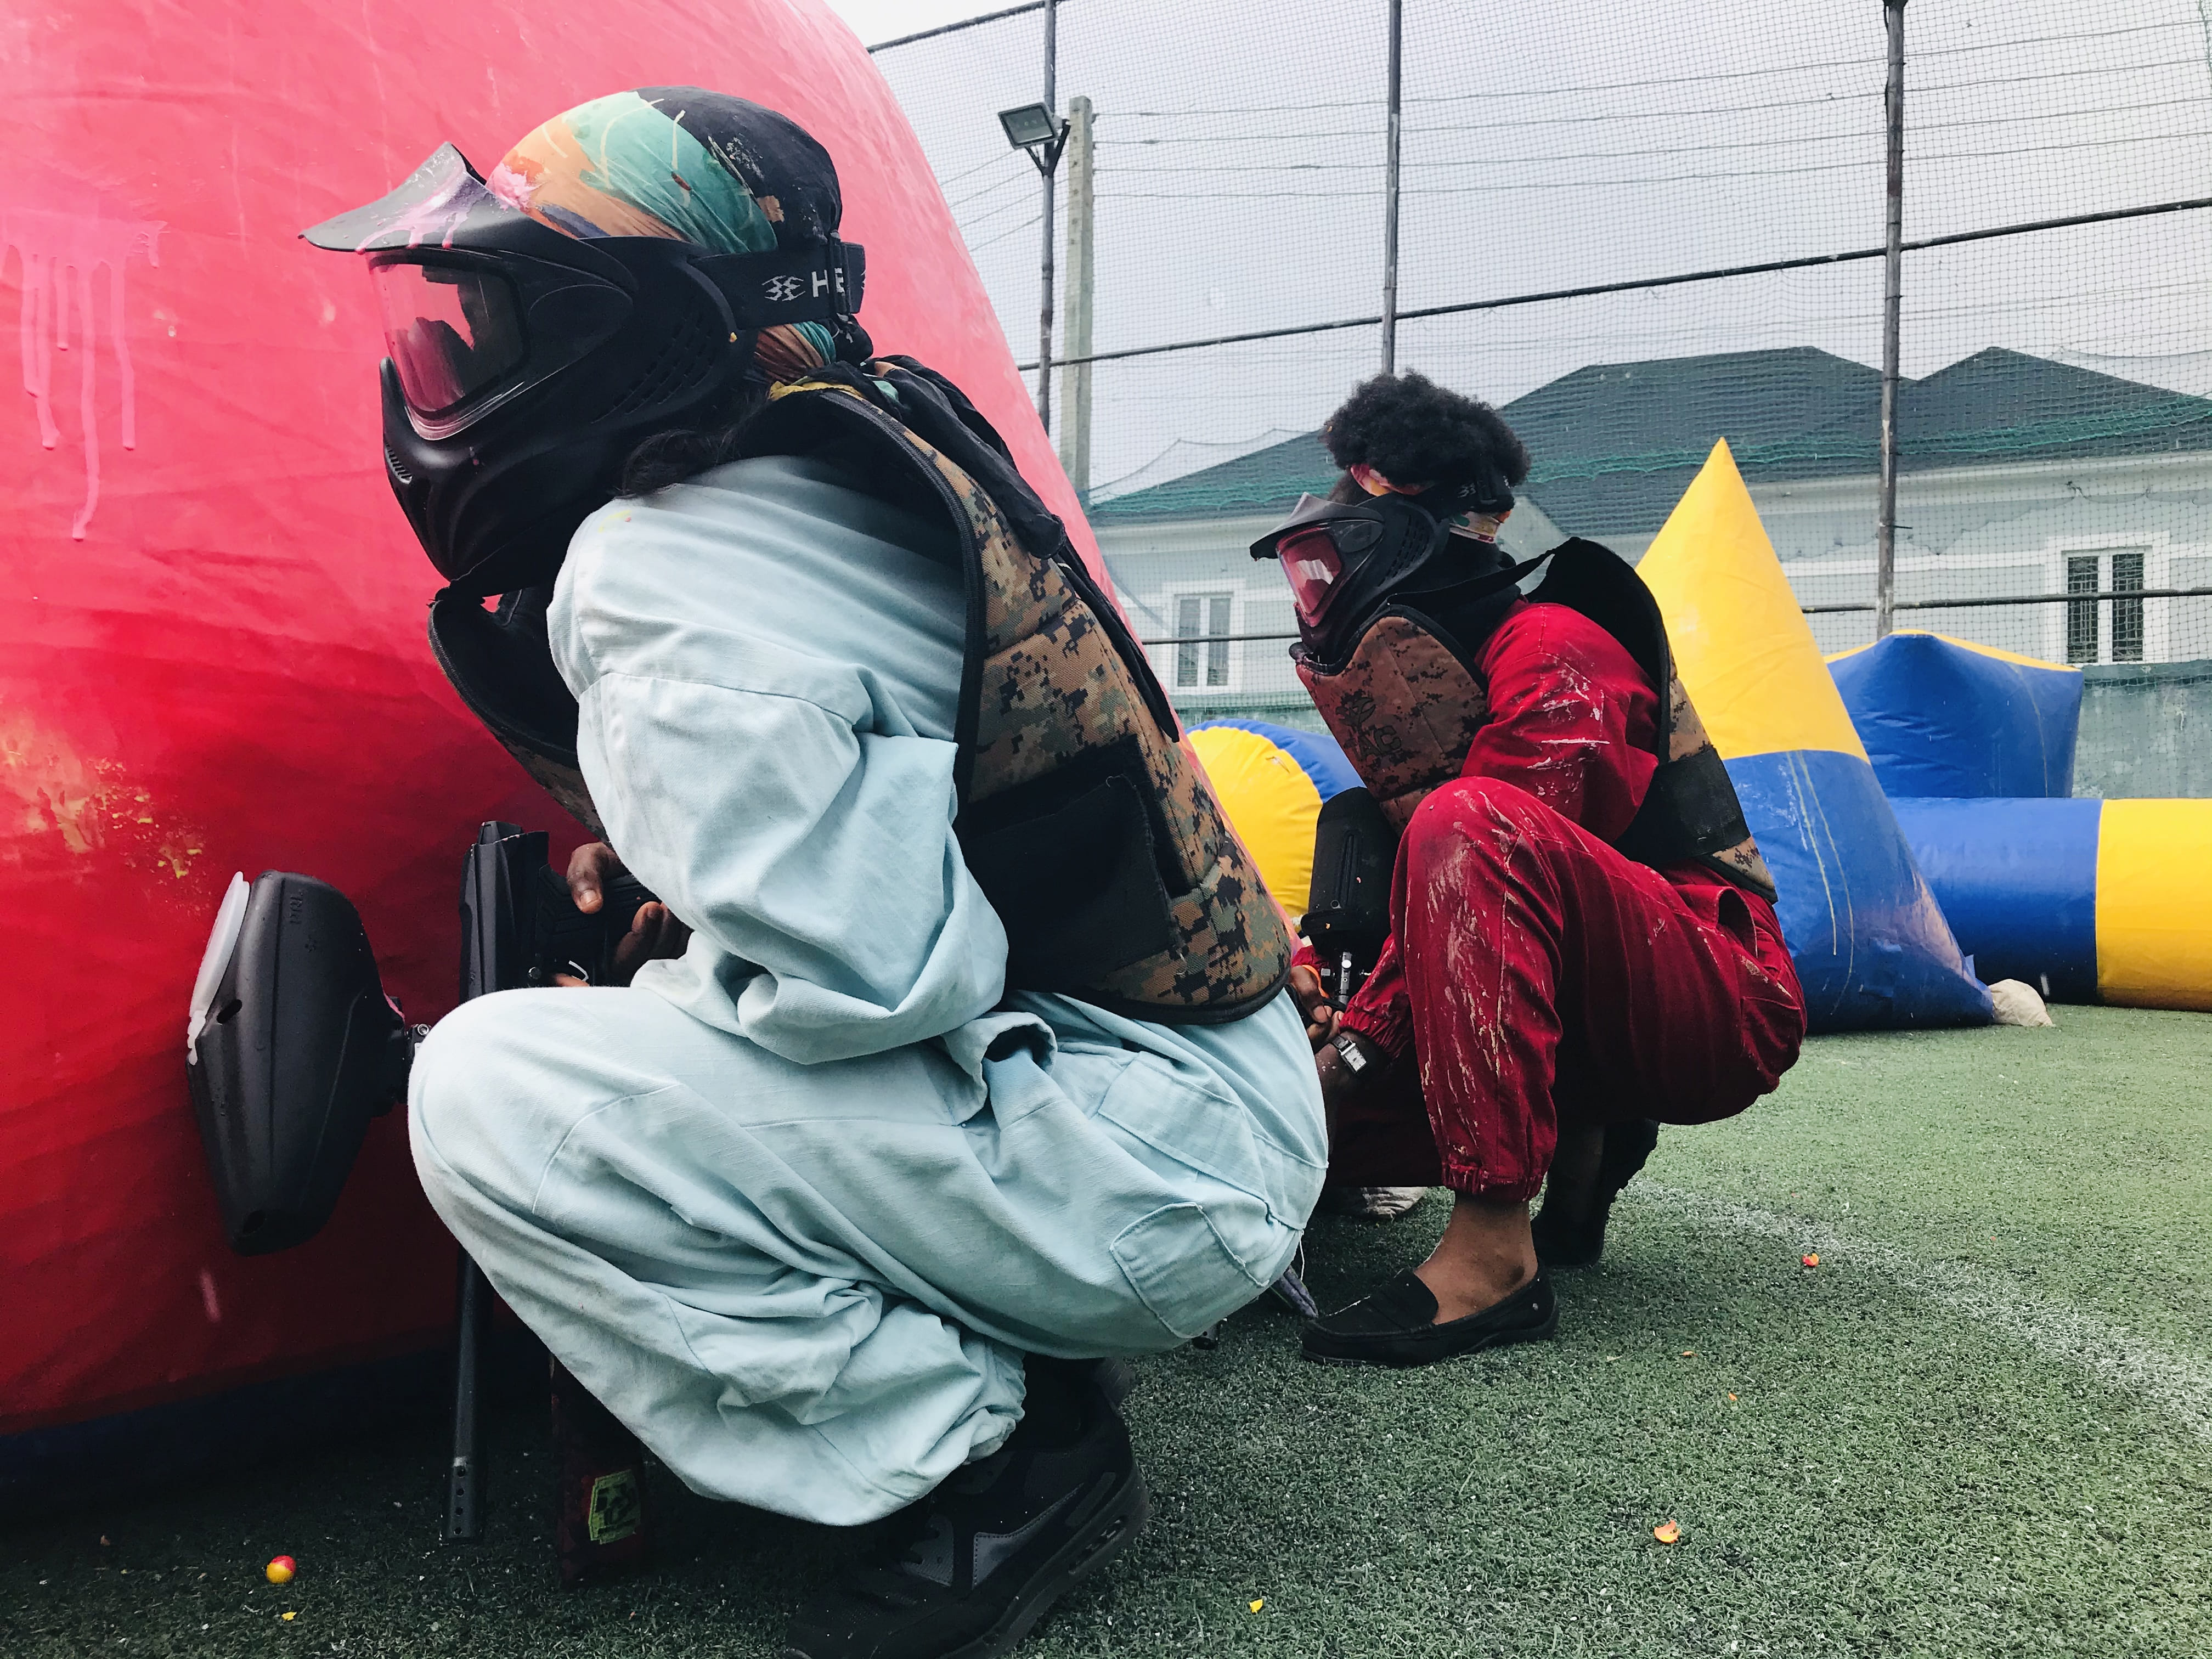 leisure sports paintball play